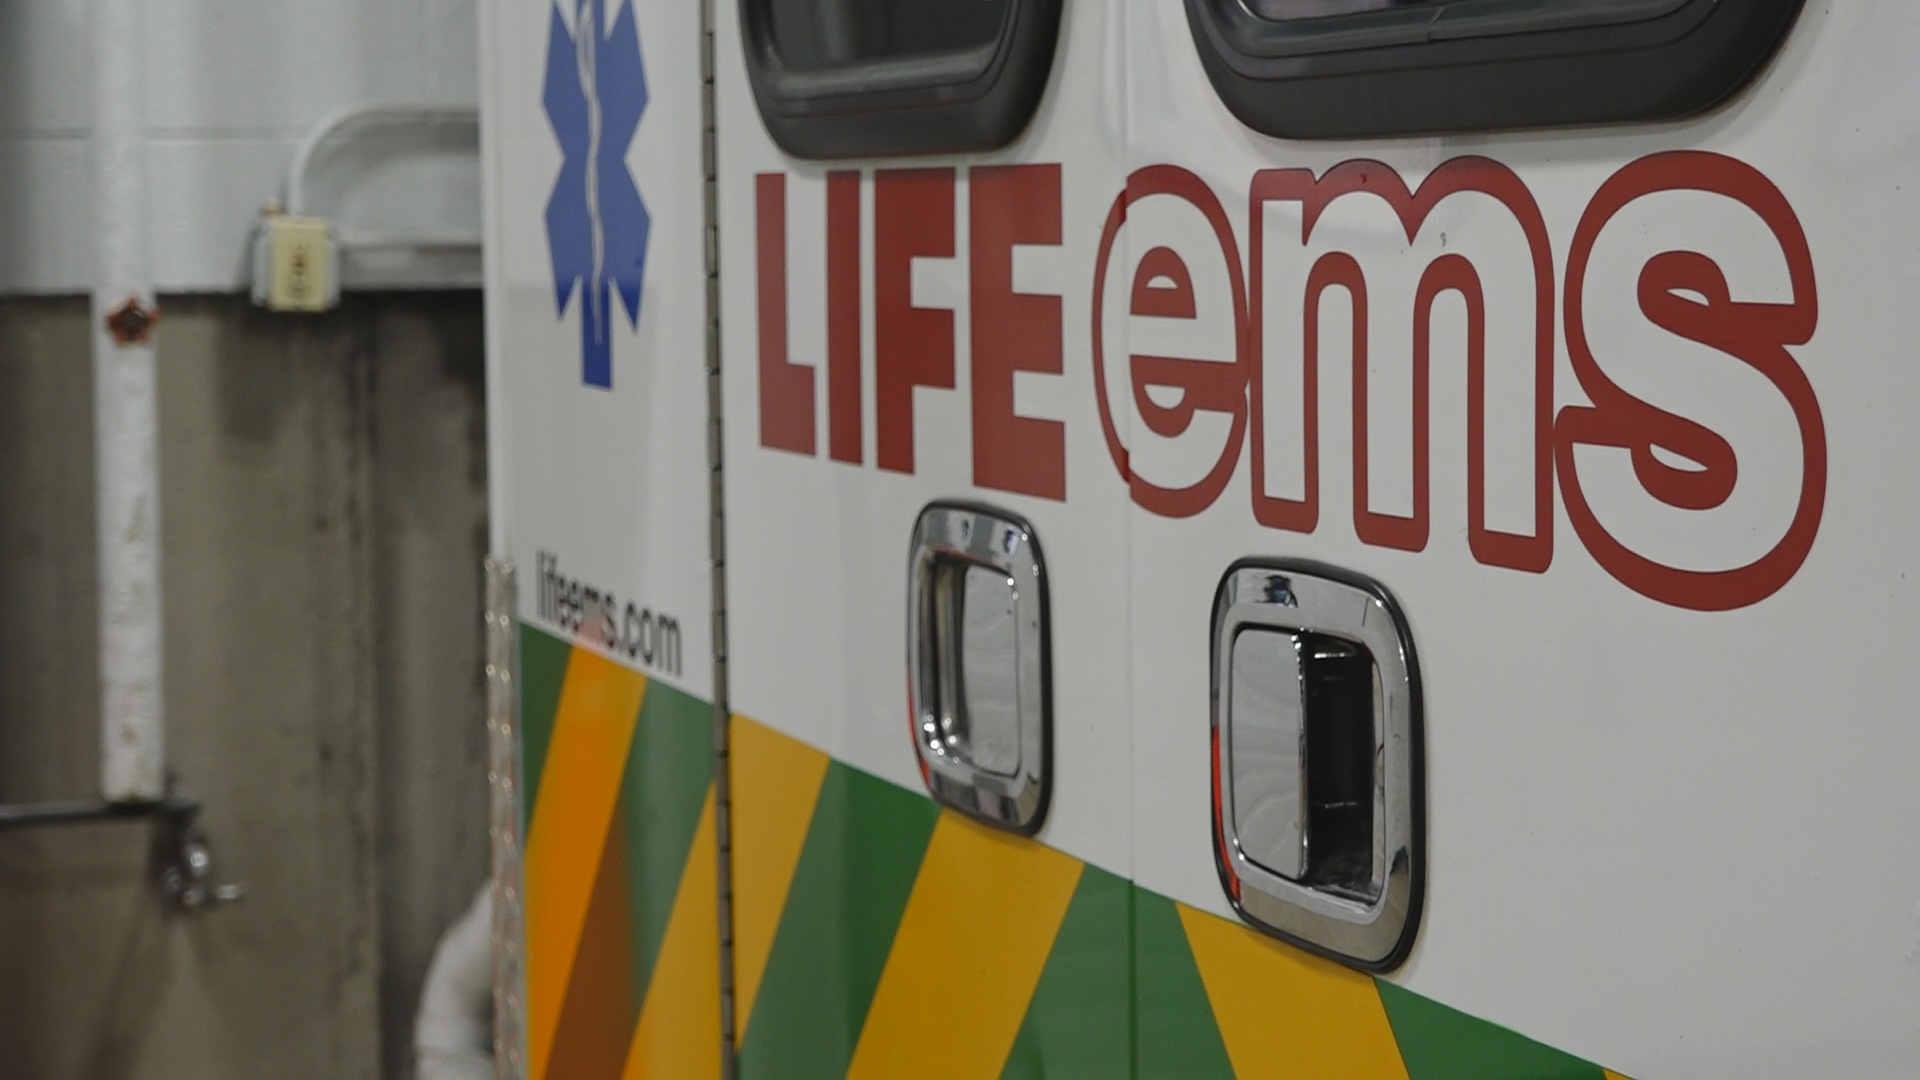 Michigan currently needs about 1,000 more EMS workers, and 20 people from Life EMS Ambulance are joining the ranks to serve the state.